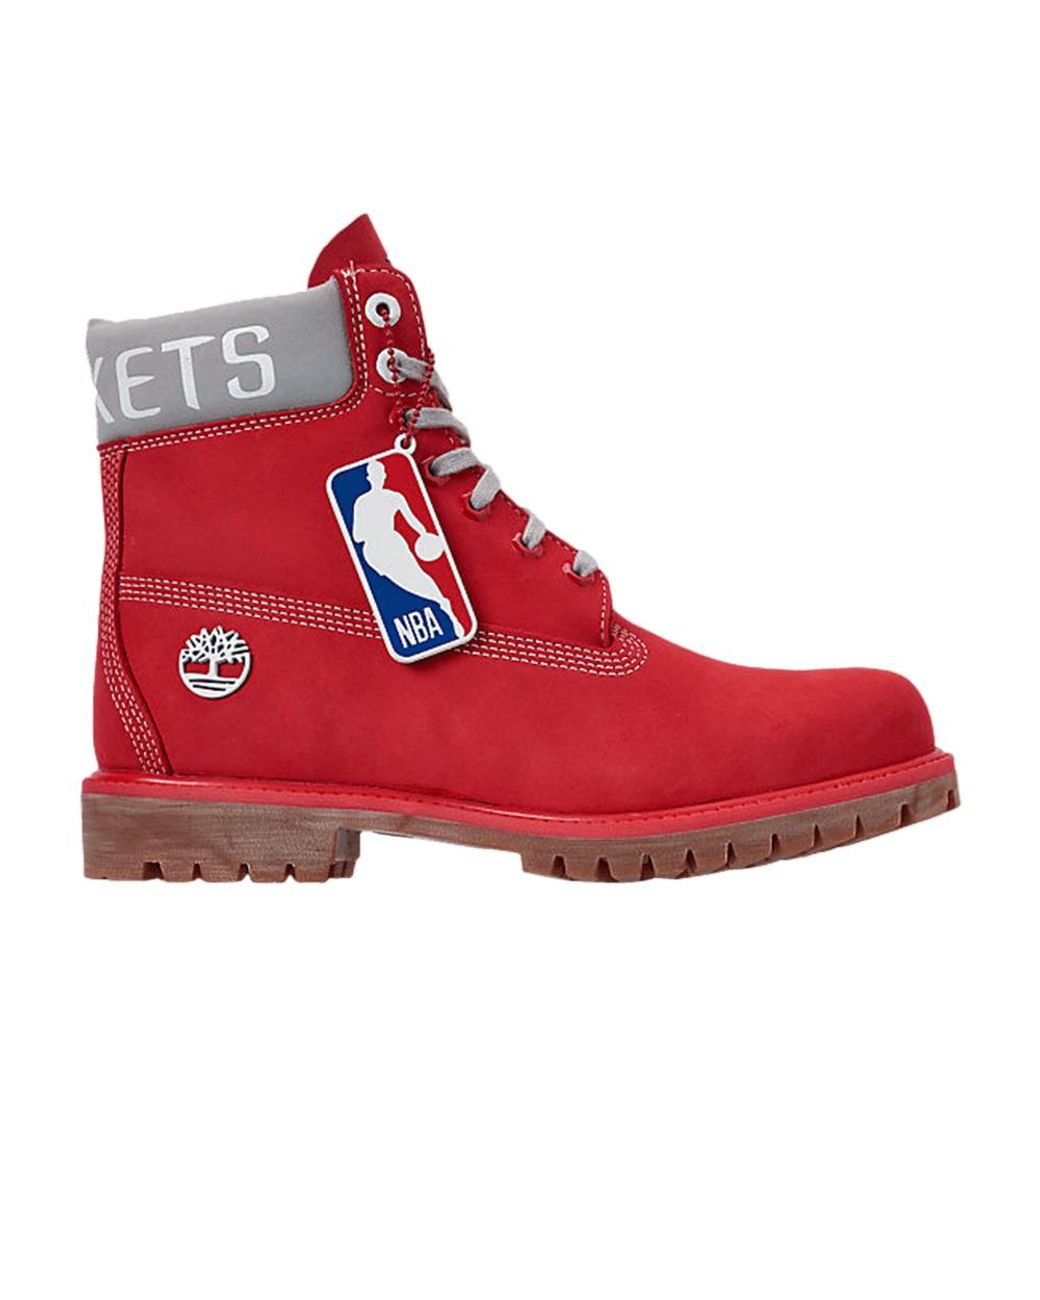 Timberland Nba X 6 Inch Classic Premium Boot in Red for Men - Lyst